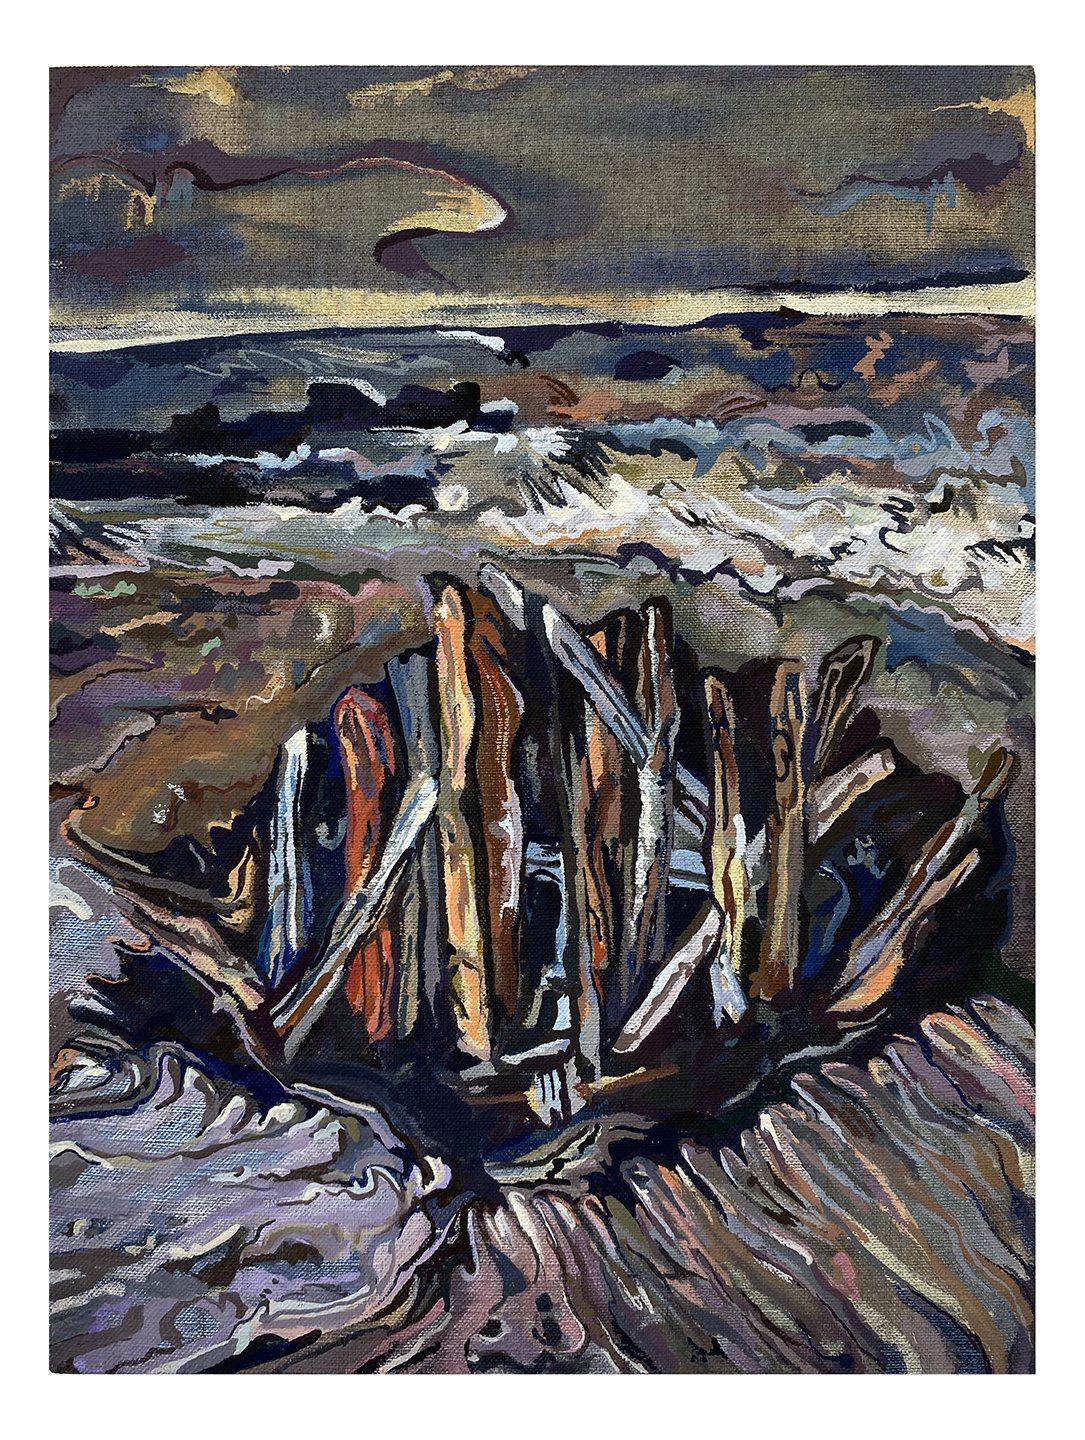  Maria Calandra, Driftwood in a Hole at Walk on Beach, 2021, acrylic on linen over panel, 12 x 9 inches 